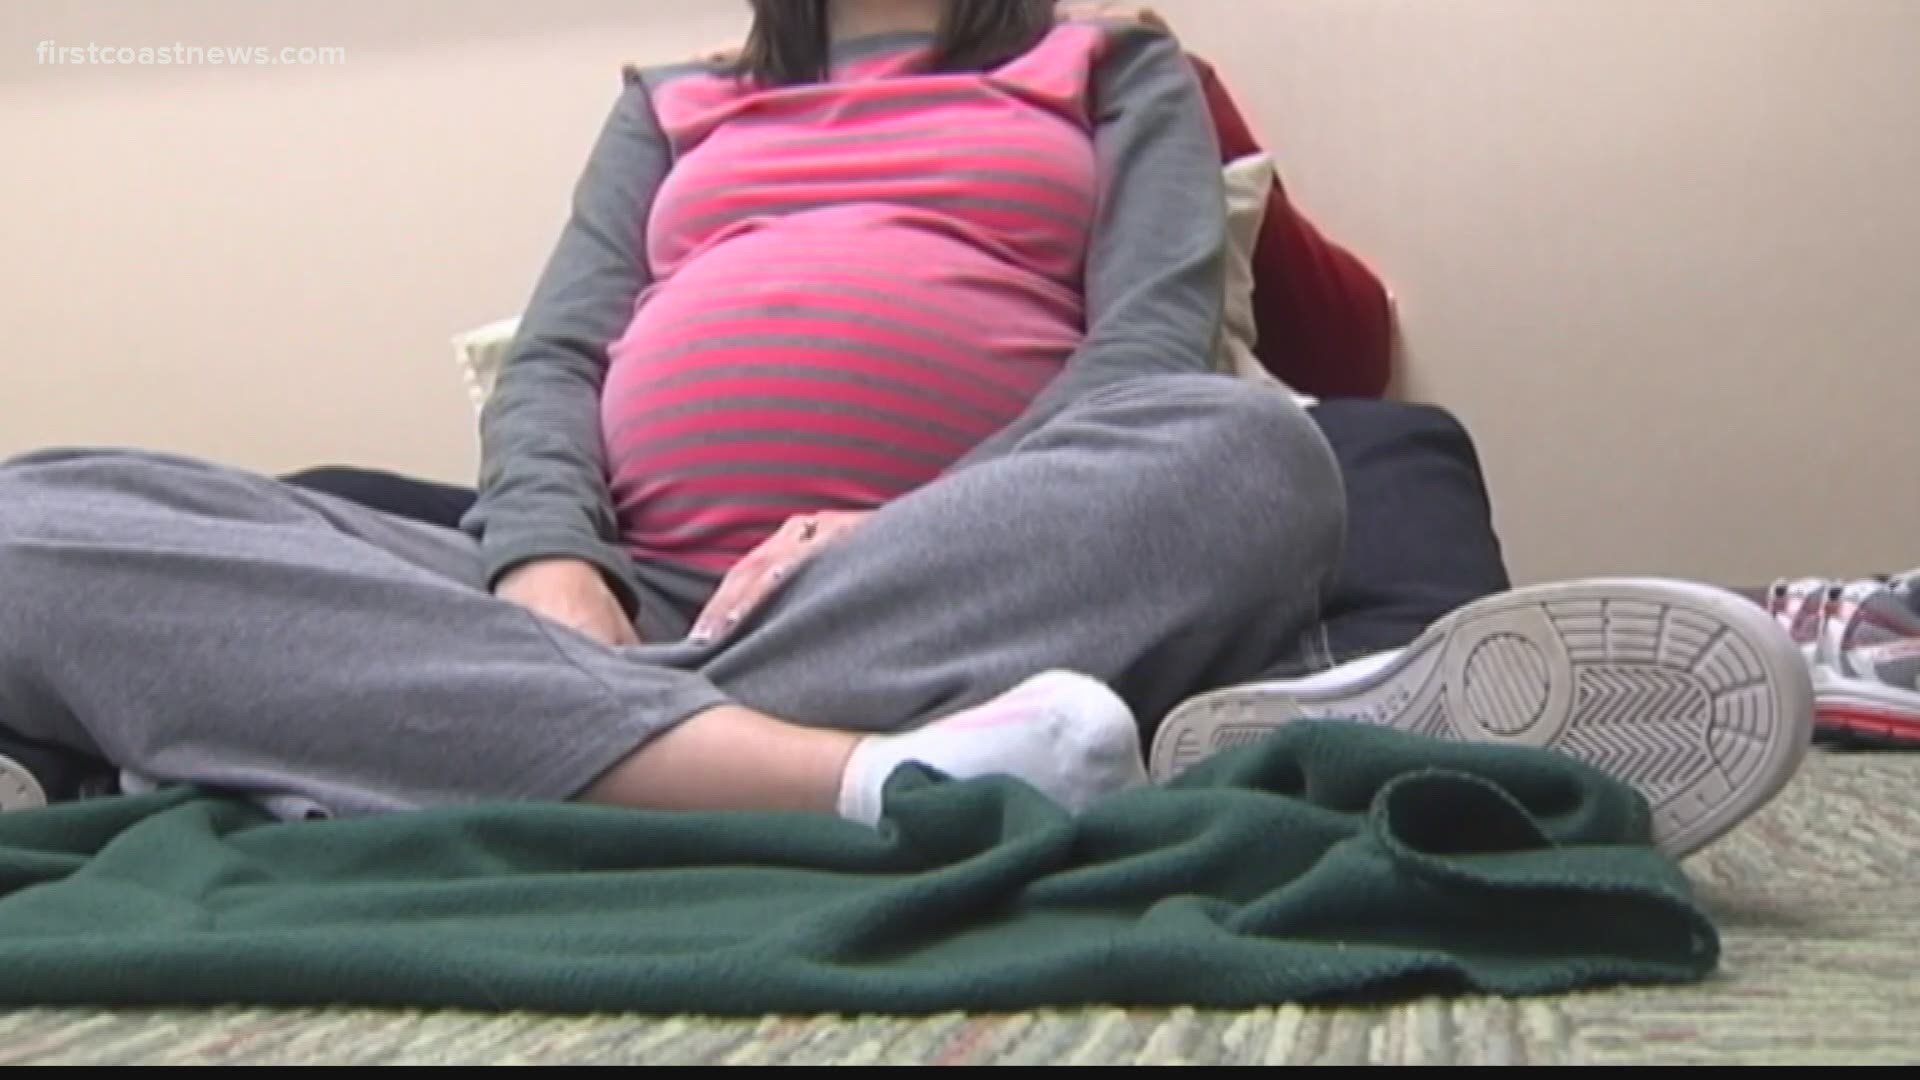 CDC encourages pregnant women to get COVID vaccine after study shows safety for mom, baby